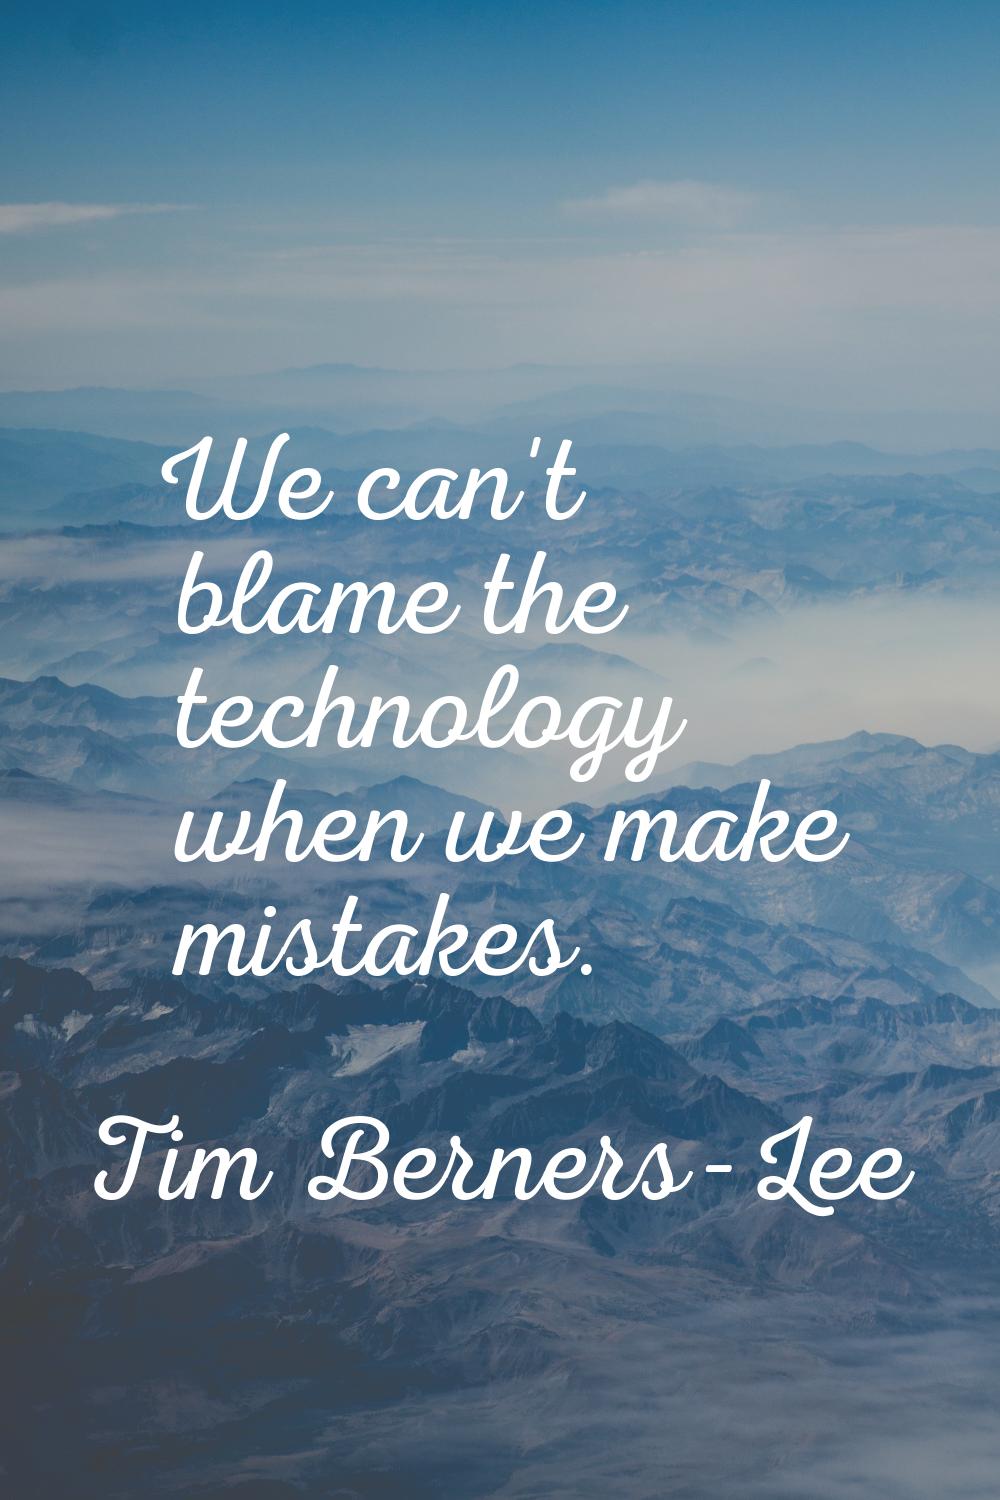 We can't blame the technology when we make mistakes.